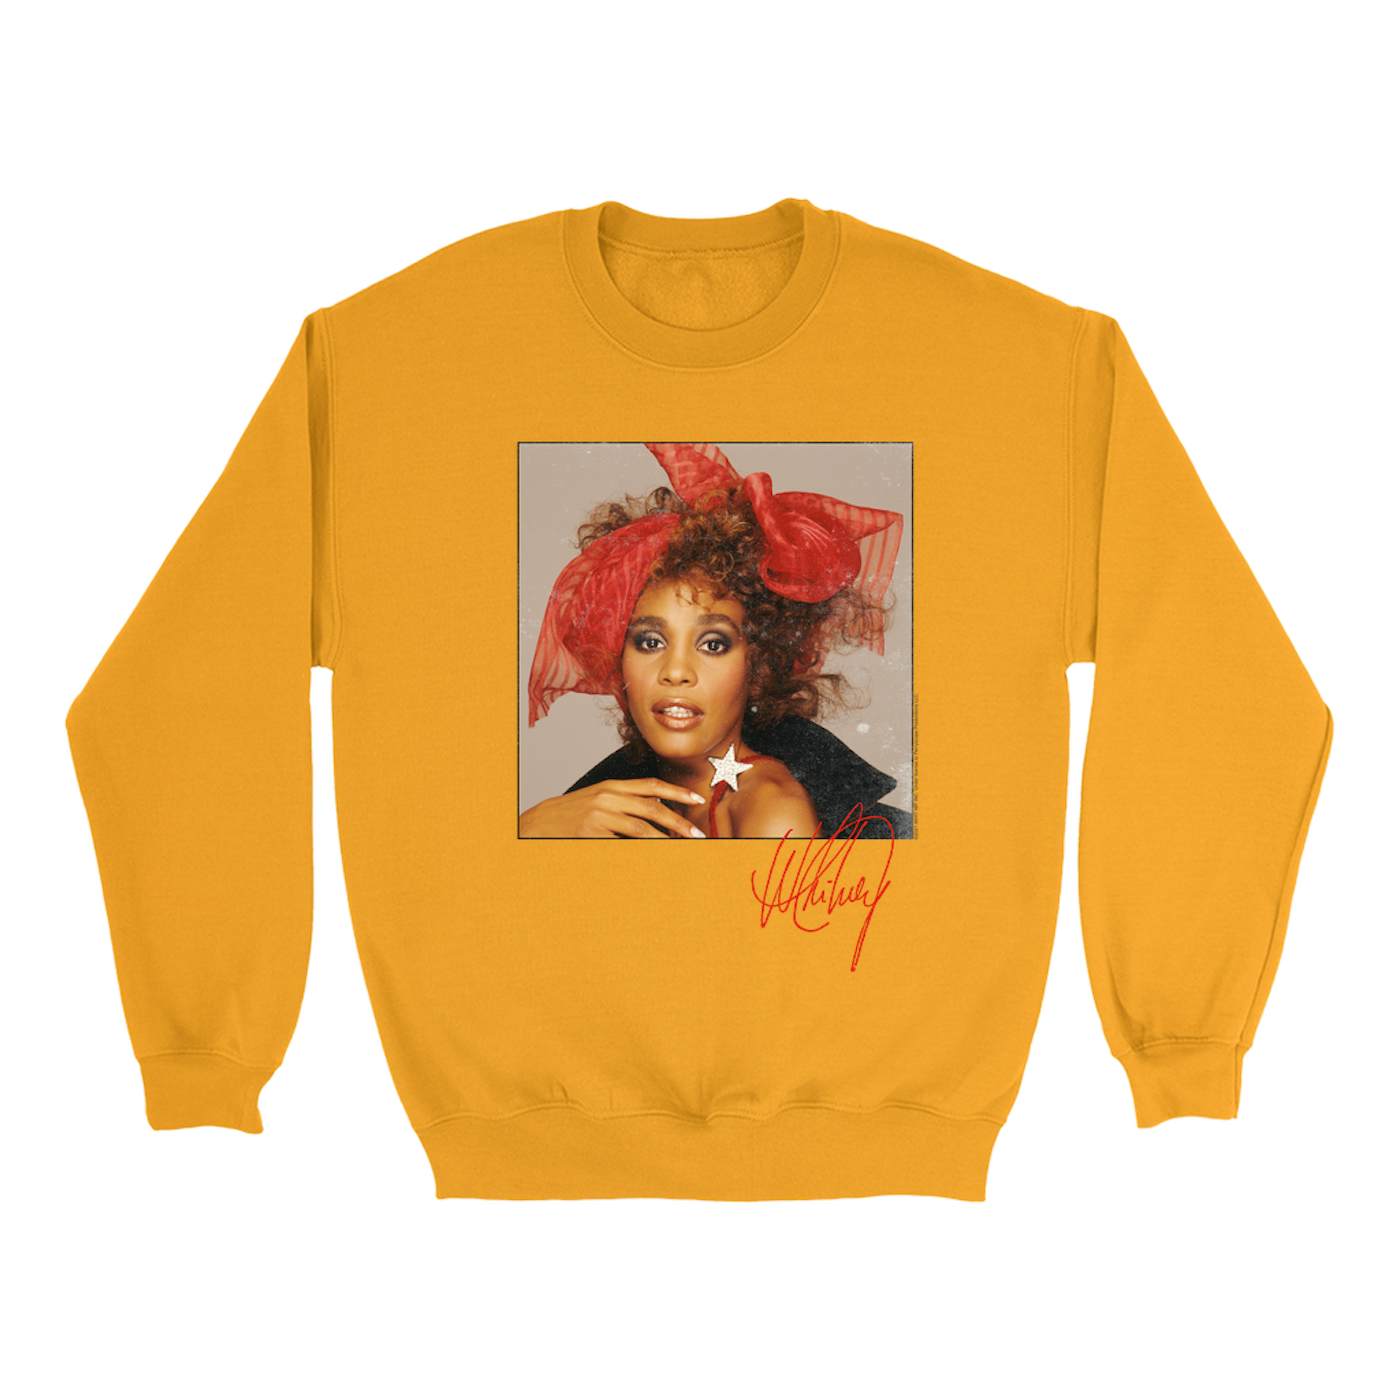 Whitney Houston Bright Colored Sweatshirt | Whitney Red Star Photo With Signature Distressed Whitney Houston Sweatshirt